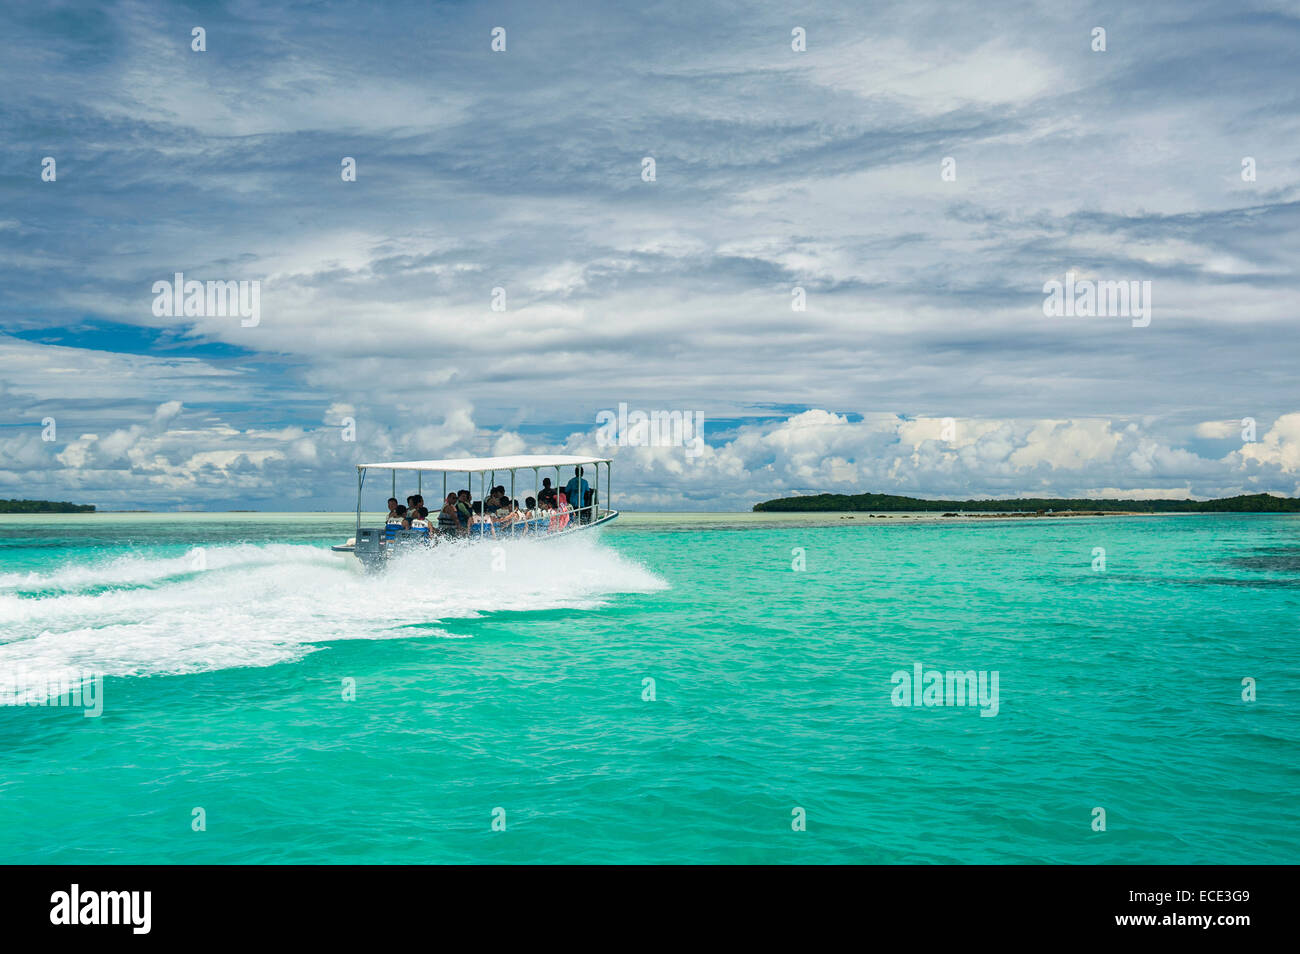 Tourist boat crossing an artificial canal, Rock Islands, Palau, Micronesia Stock Photo